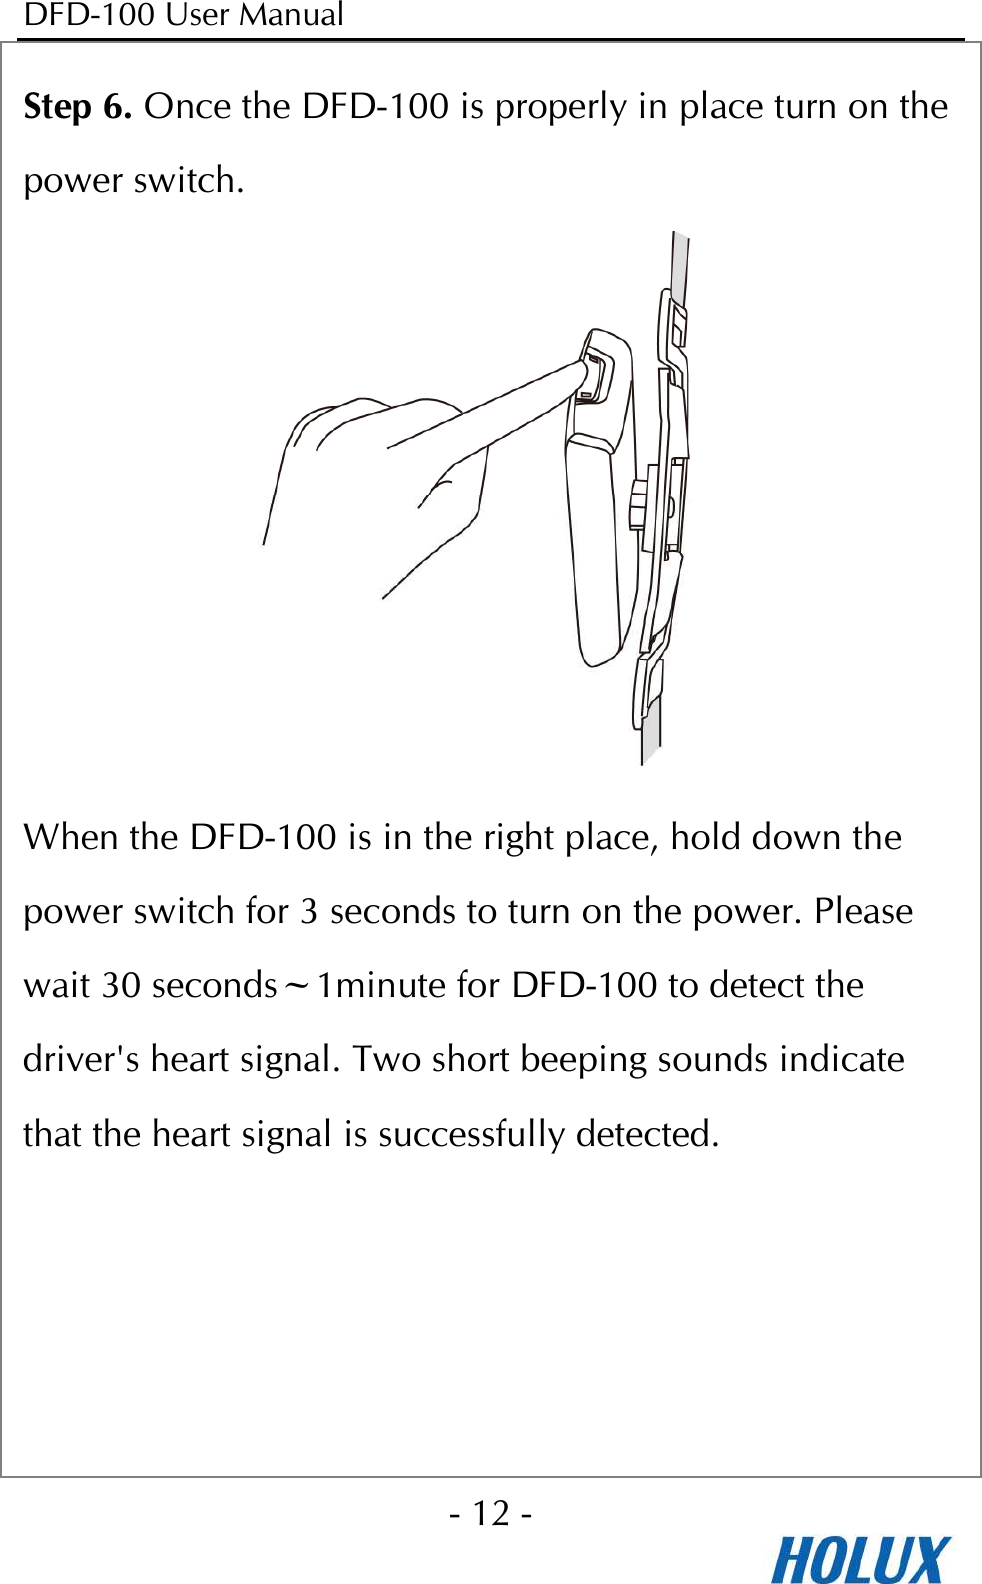 DFD-100 User Manual - 12 -  Step 6. Once the DFD-100 is properly in place turn on the power switch.  When the DFD-100 is in the right place, hold down the power switch for 3 seconds to turn on the power. Please wait 30 seconds~1minute for DFD-100 to detect the driver&apos;s heart signal. Two short beeping sounds indicate that the heart signal is successfully detected.    